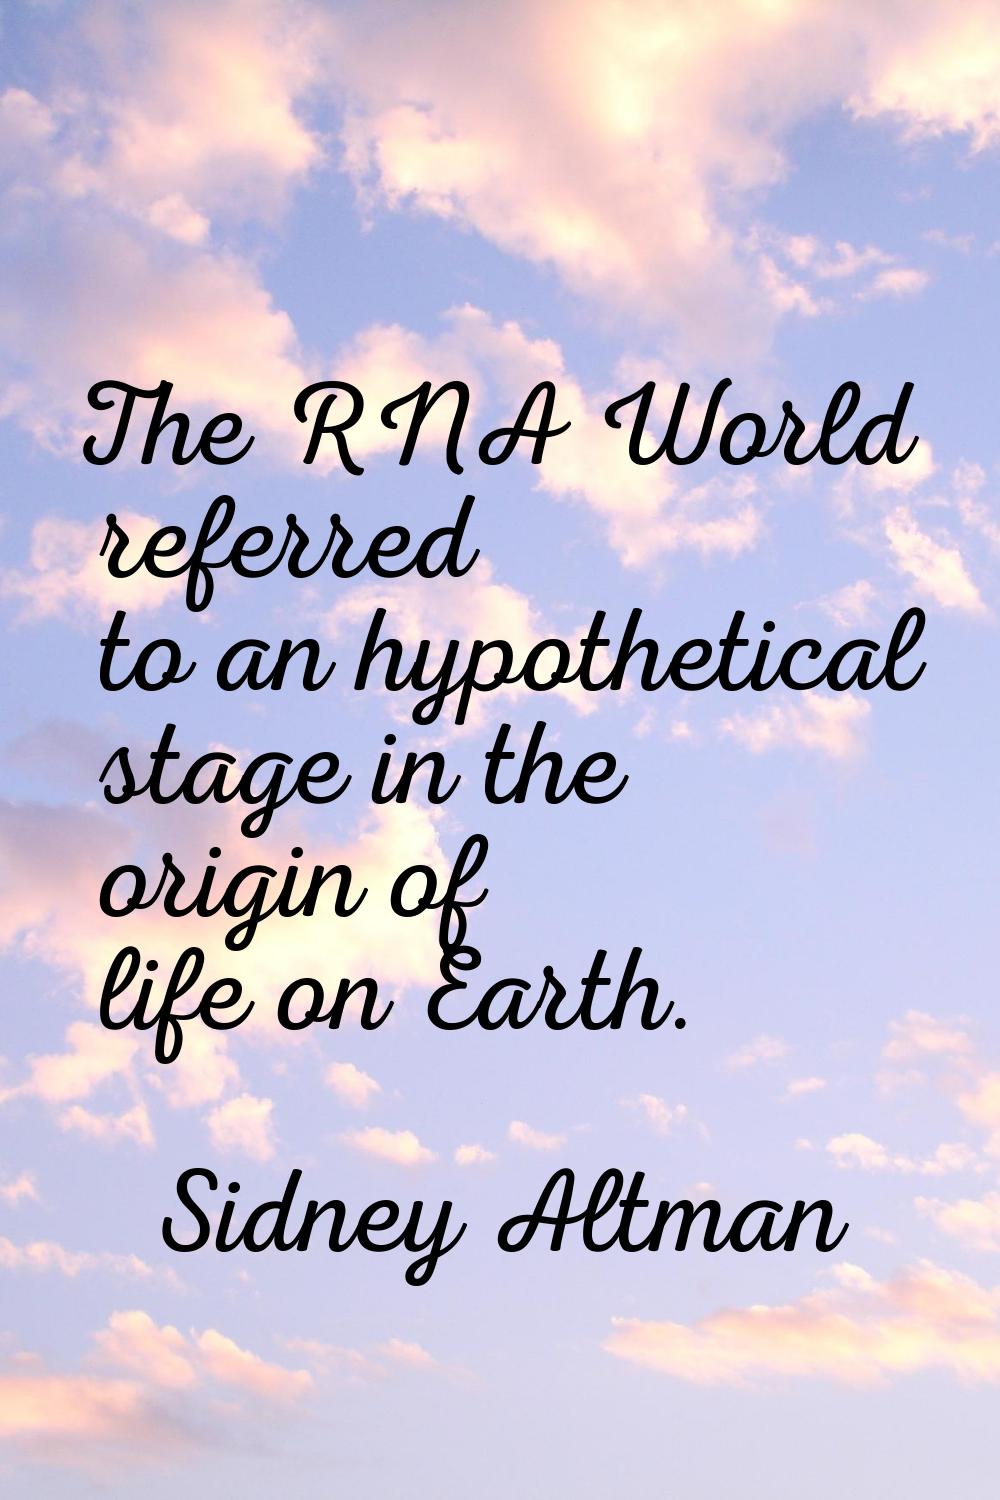 The RNA World referred to an hypothetical stage in the origin of life on Earth.